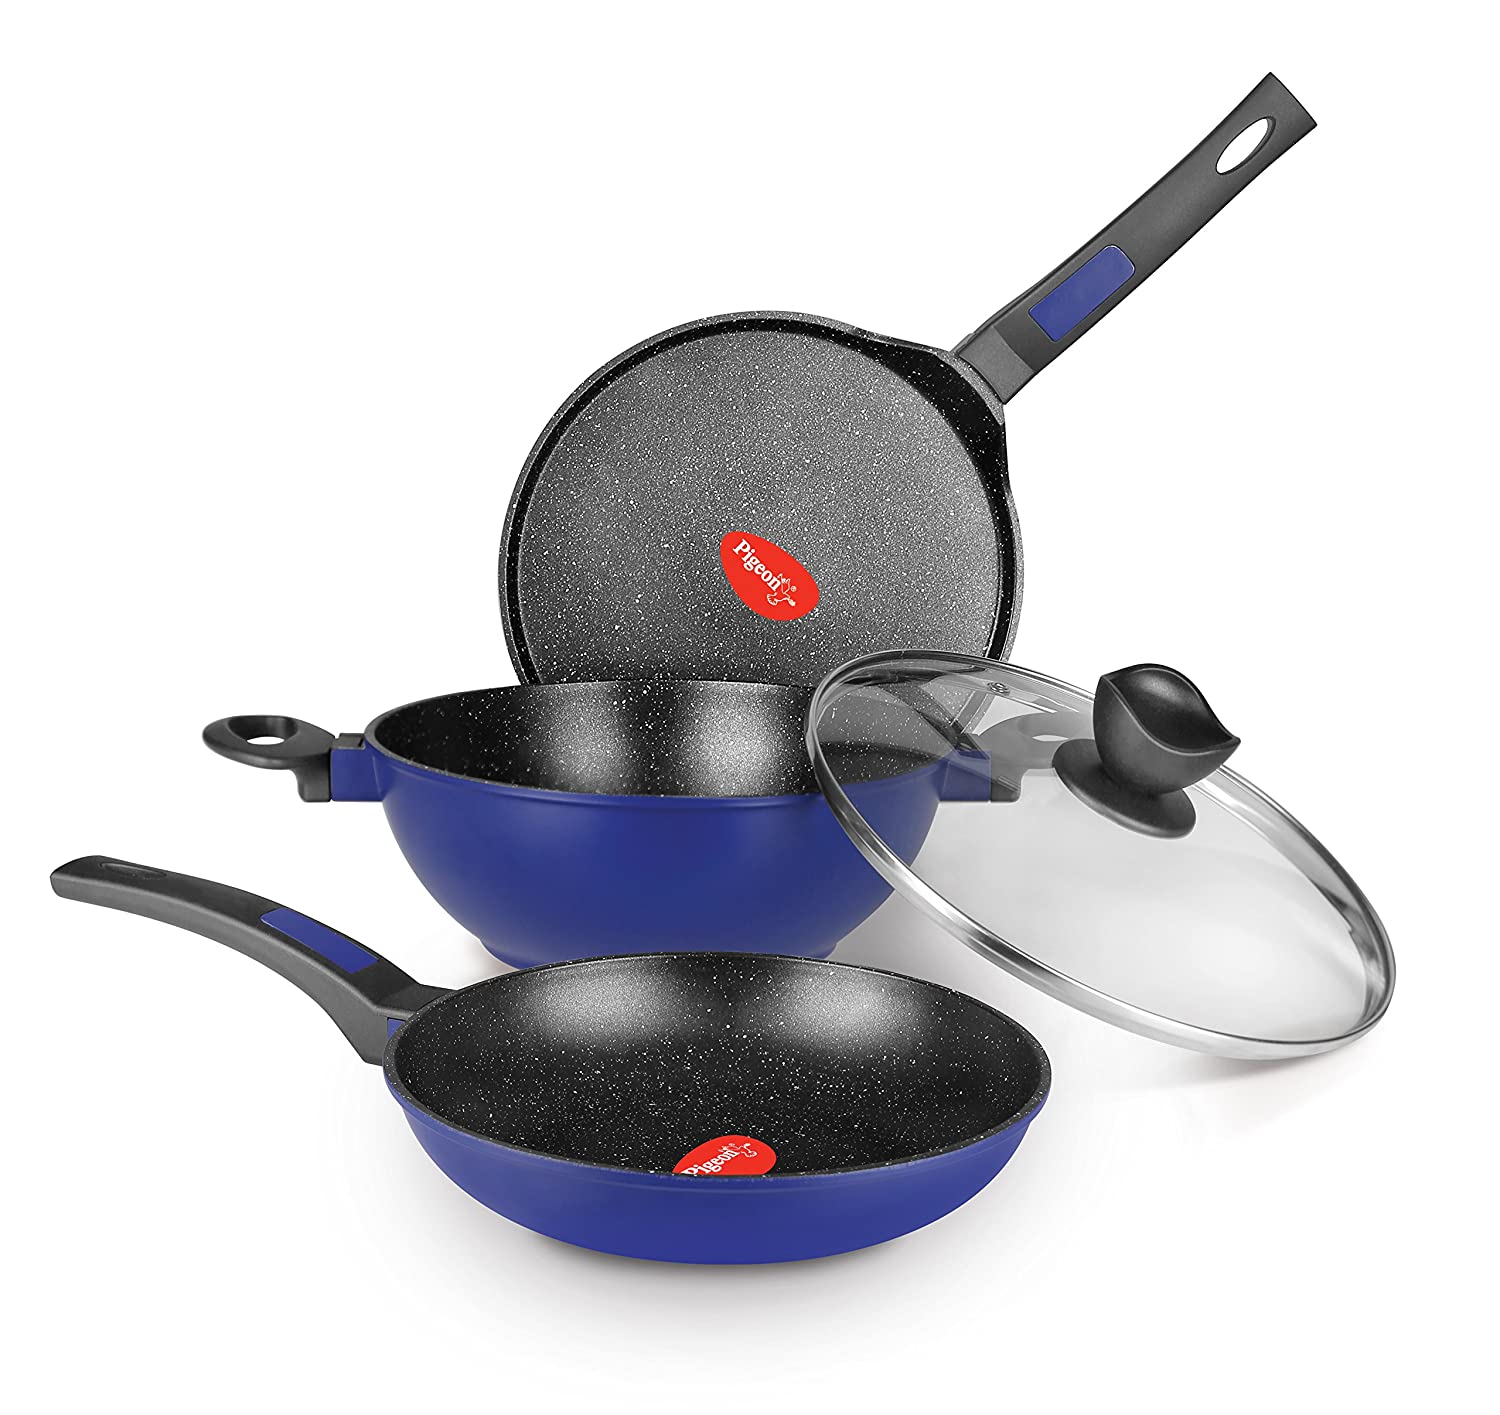 Pigeon by Stovekraft Crest Non stick Induction Base Aluminum Cookware Set (Blue and Black)